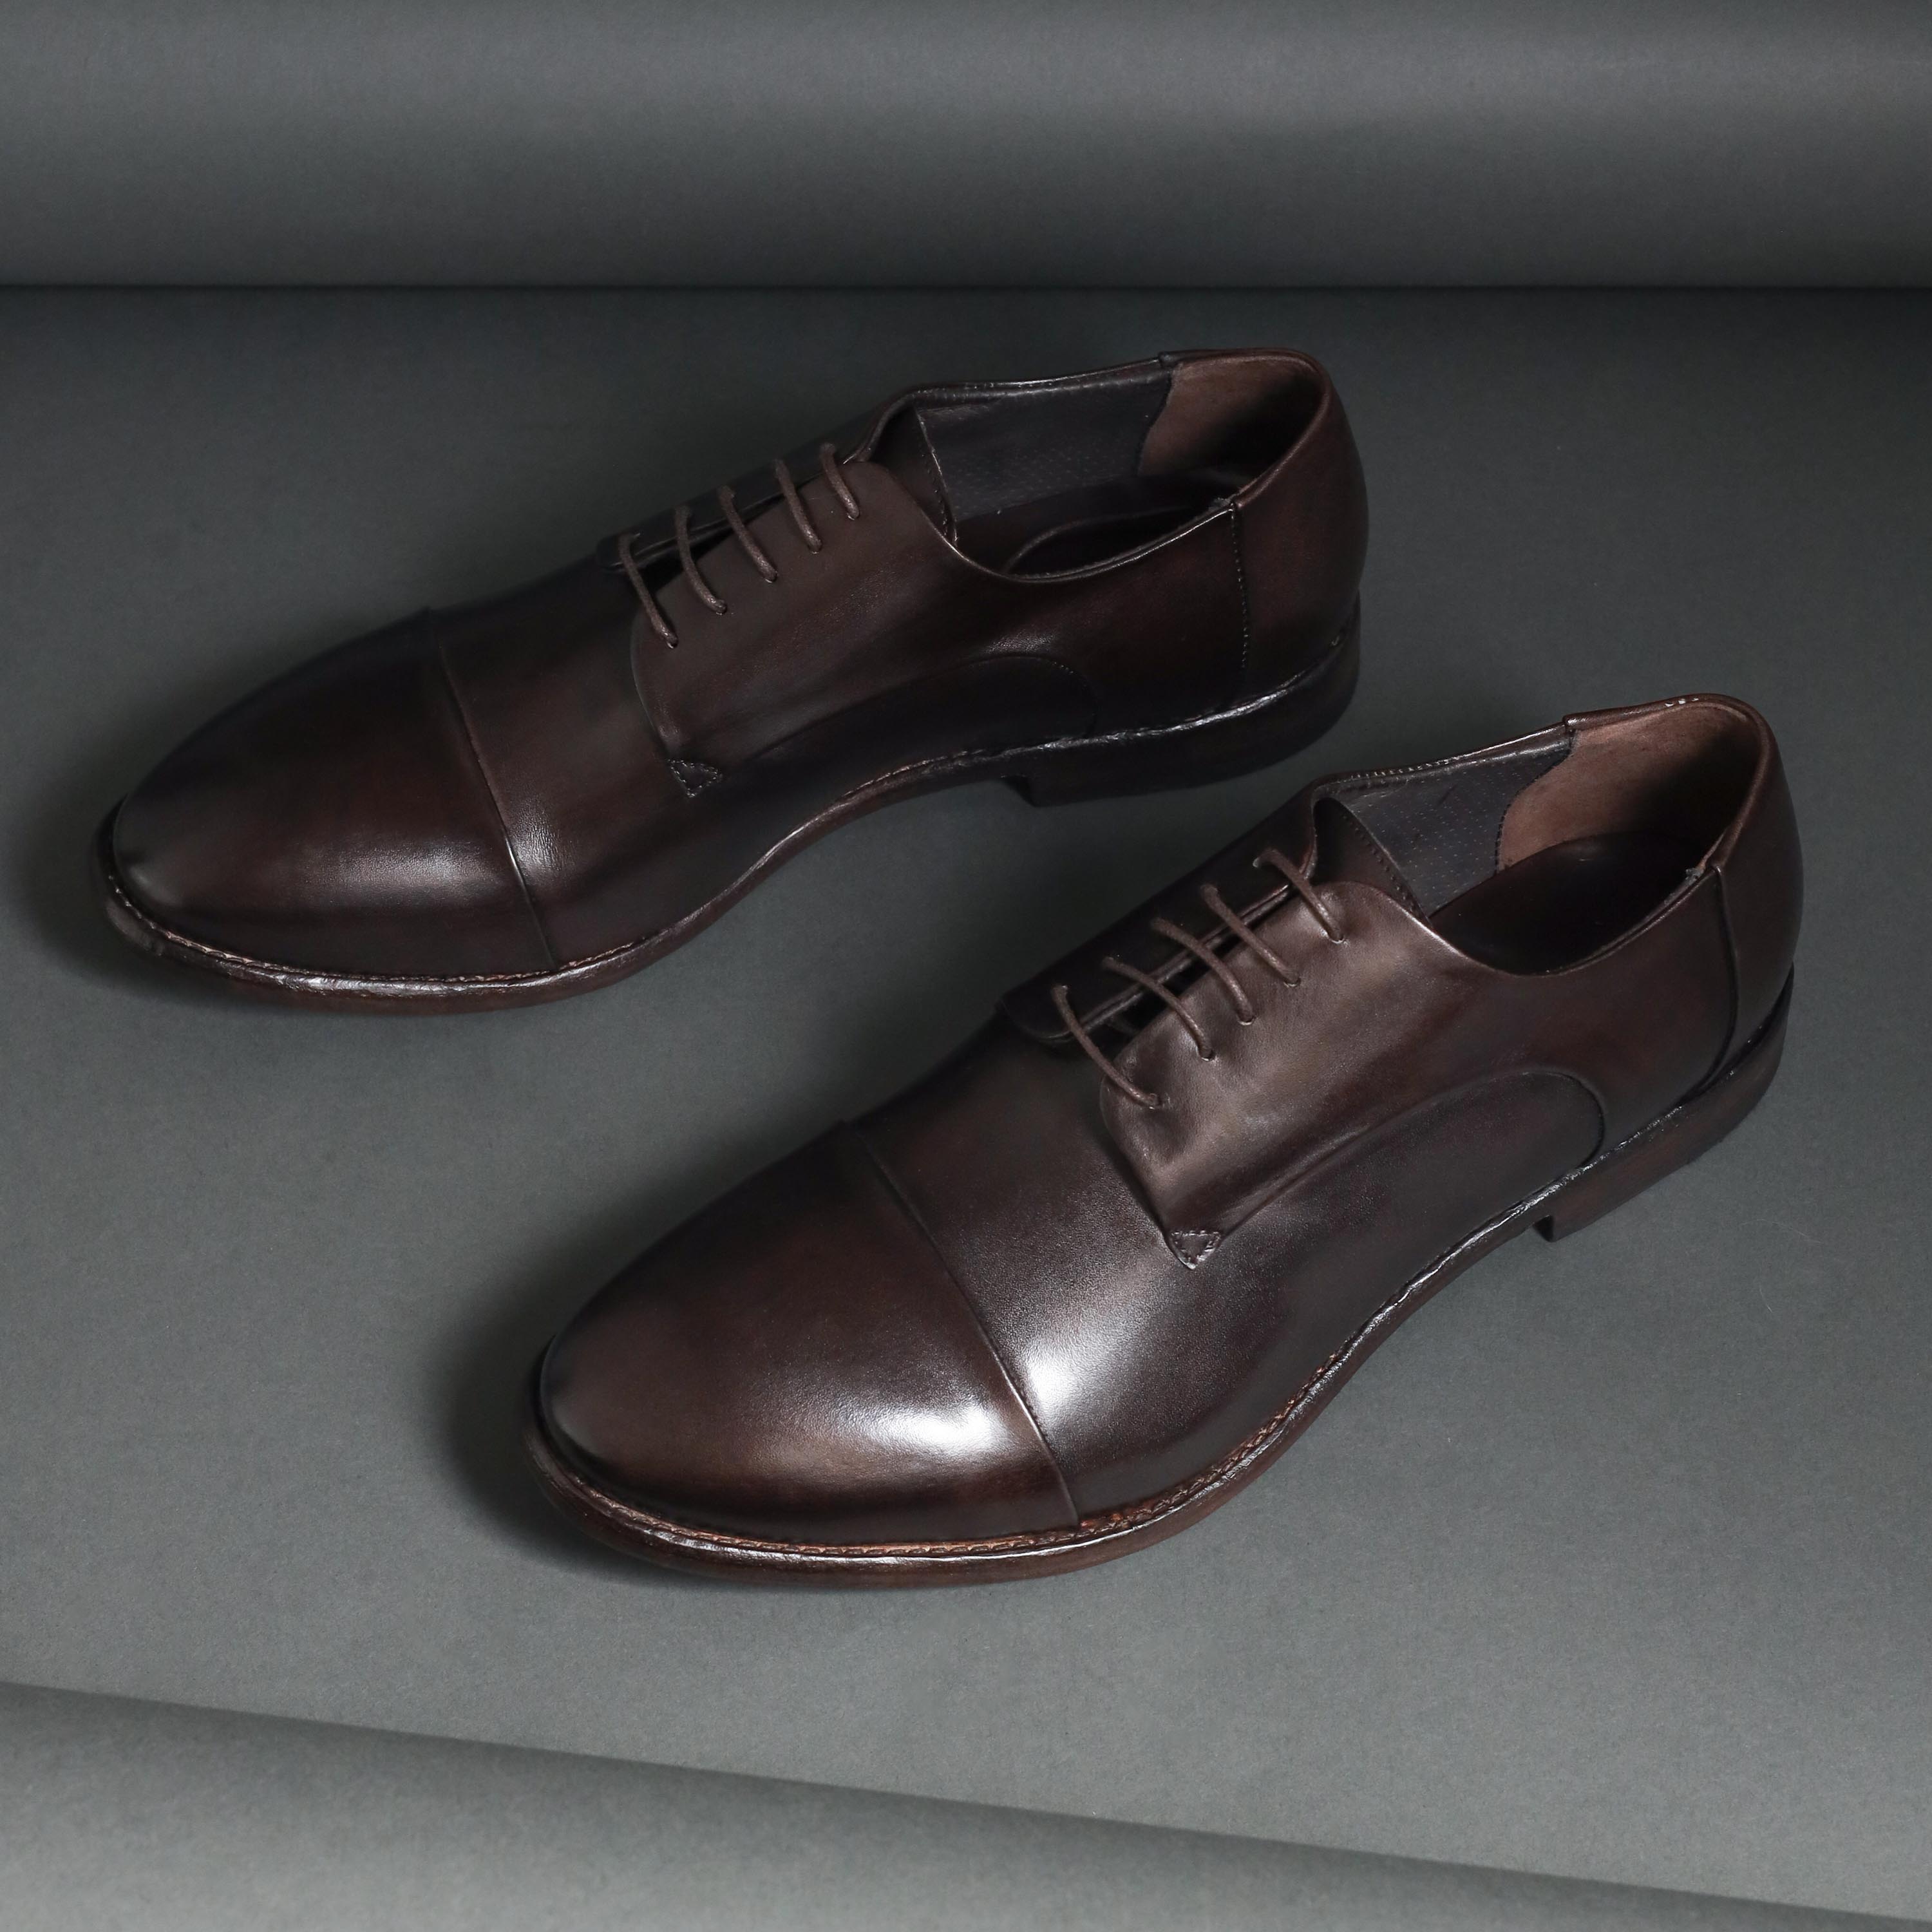 Conflict For Interest Lace Up Derby Conflict For Interest Modena Dark Brown